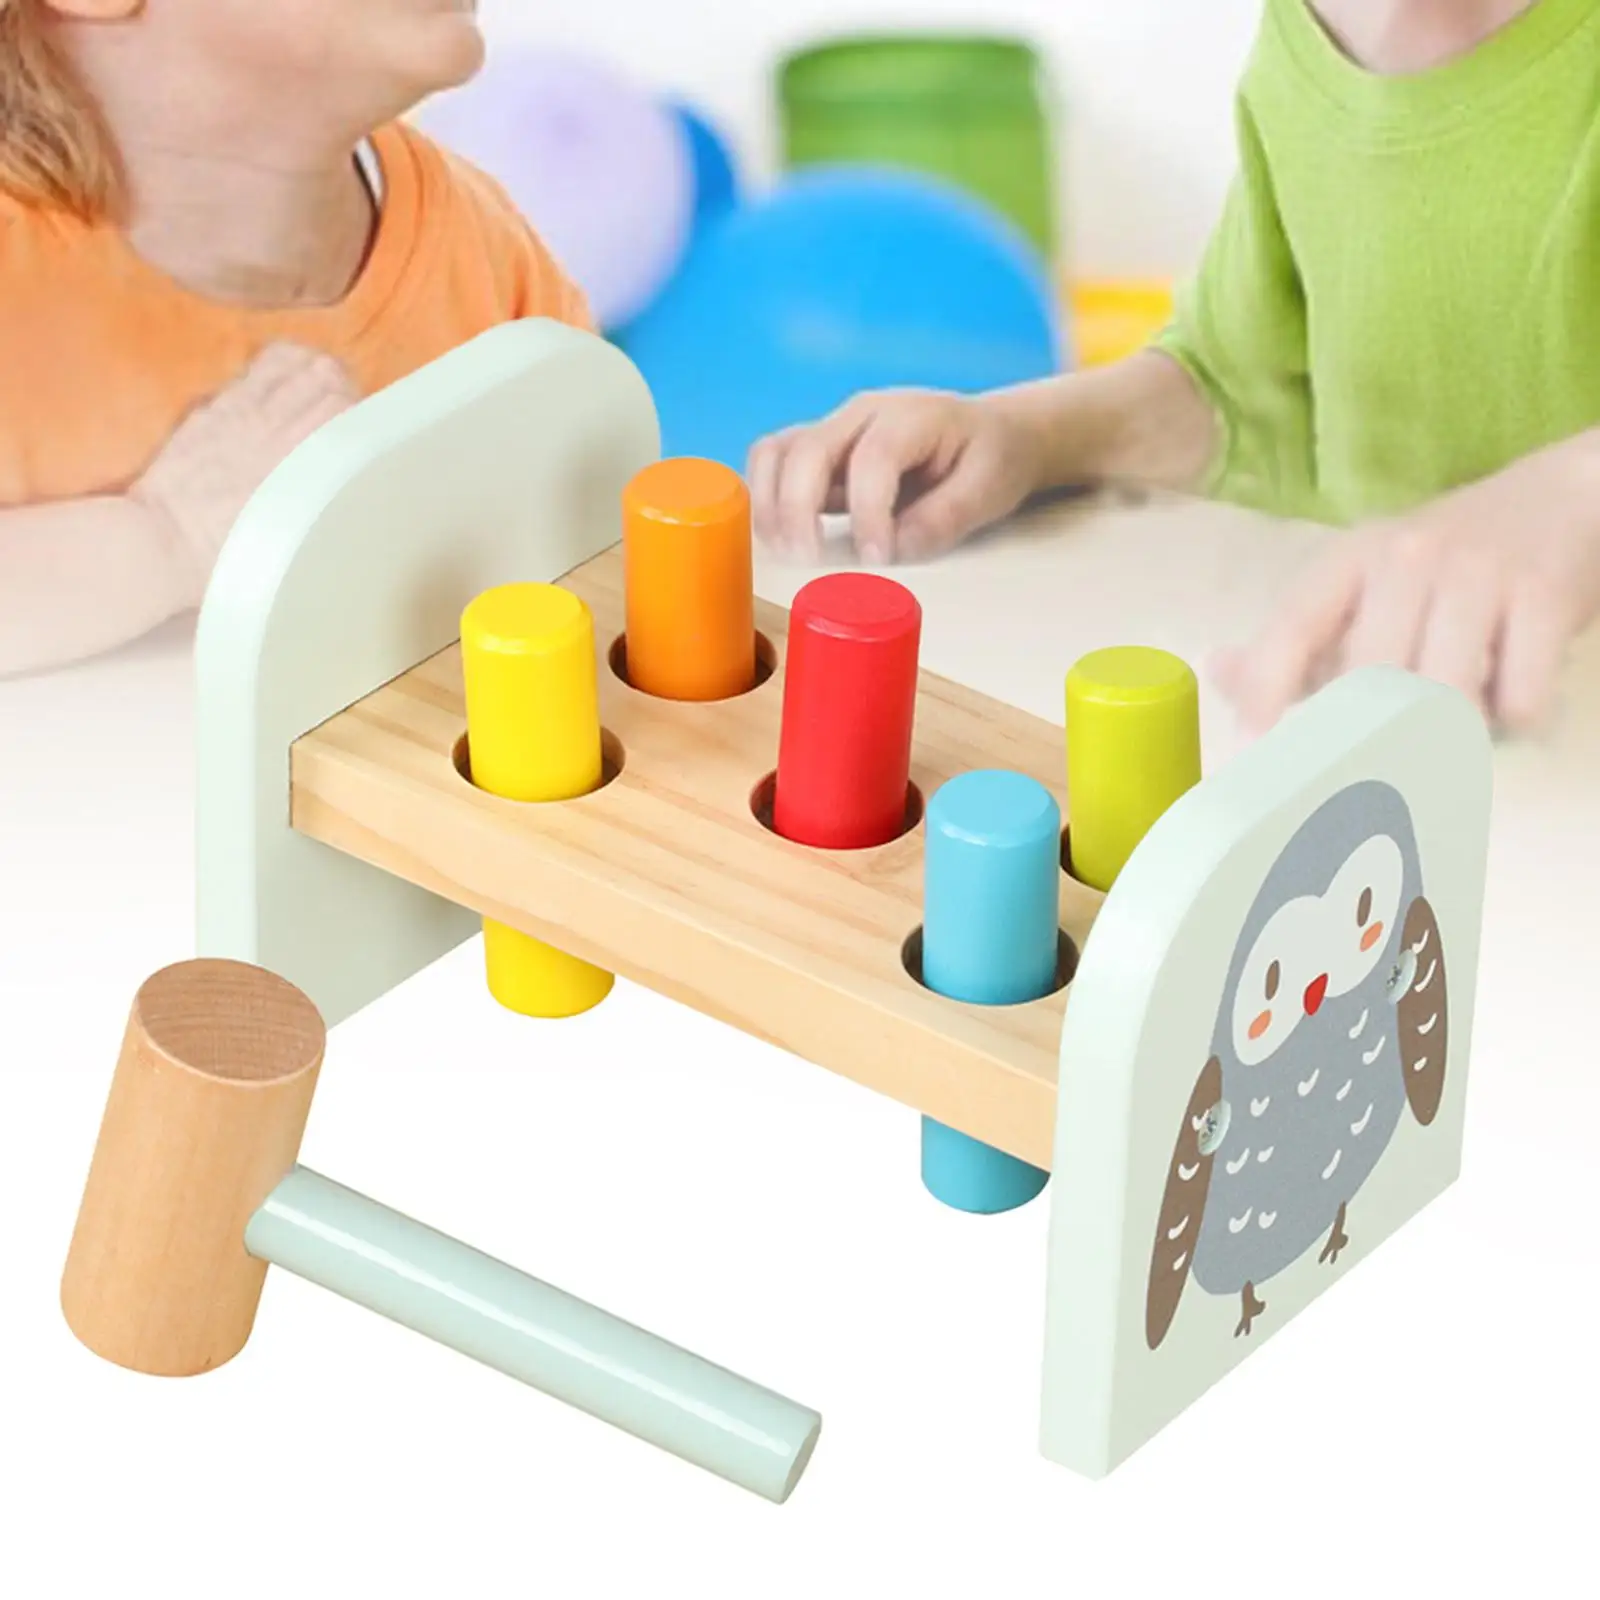 Pounding Bench Wood Toy Wooden Pounding Bench for Birthday Gift Boys Girls